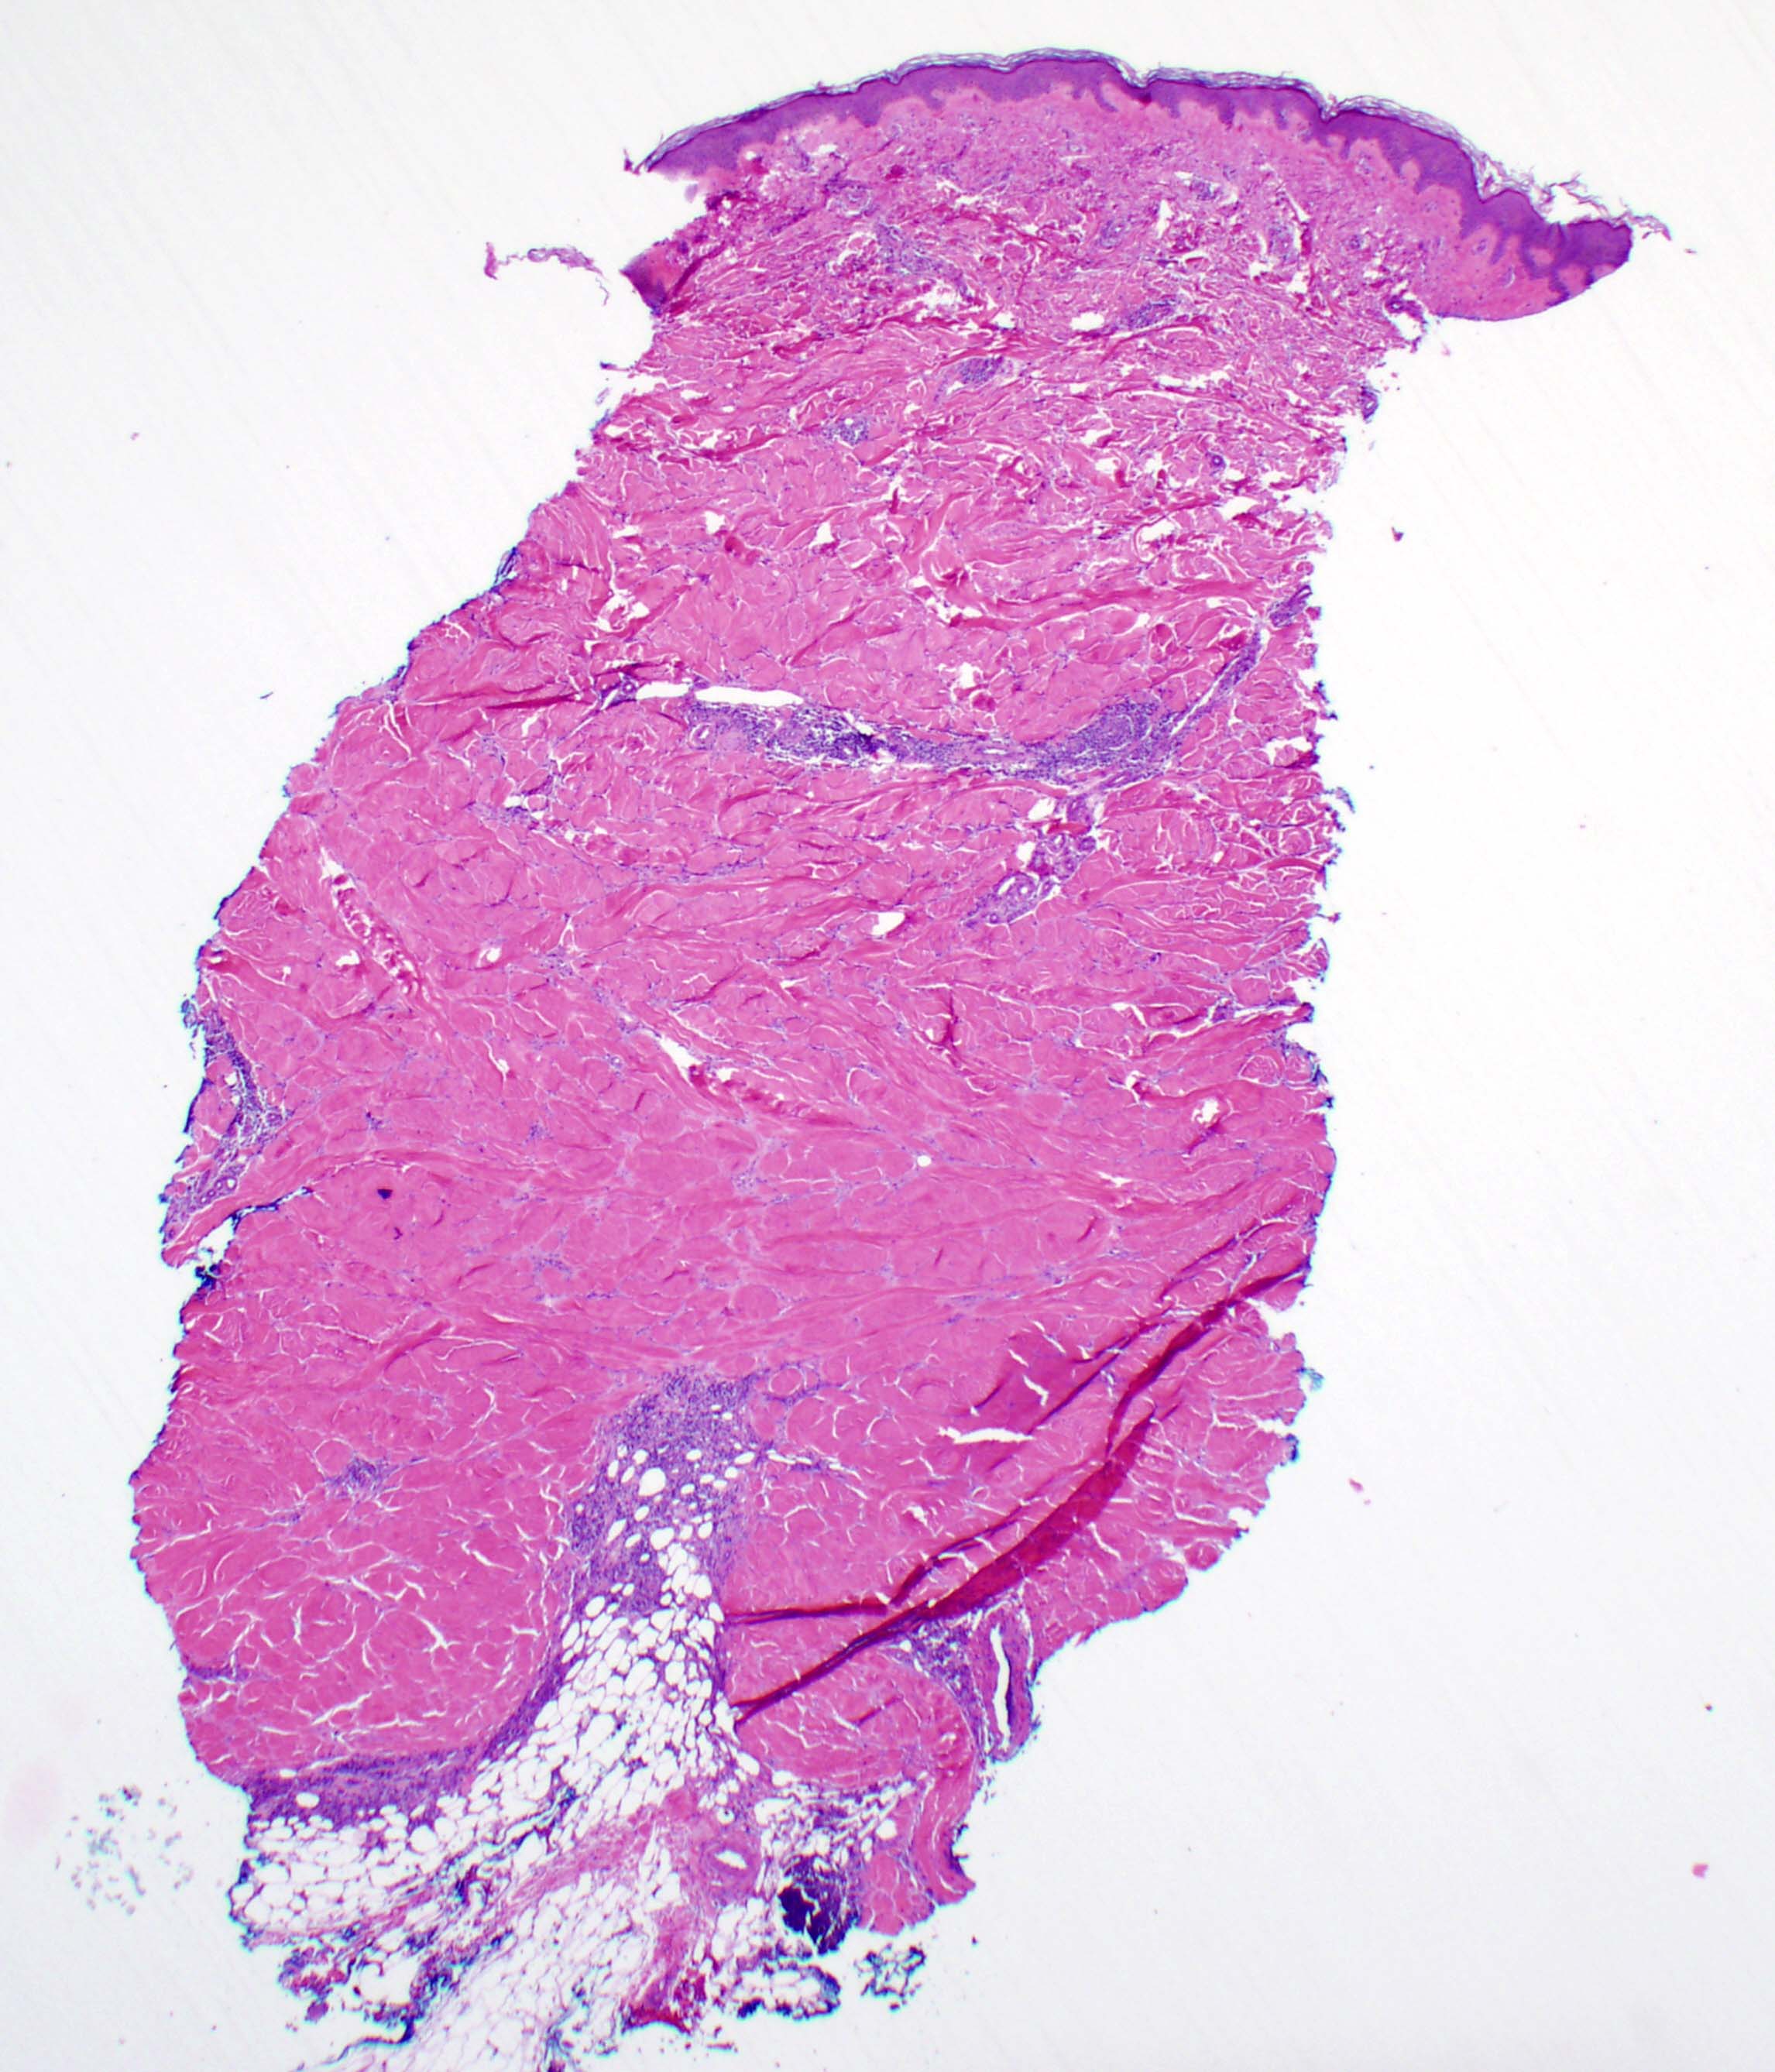 Early scleroderma lesion